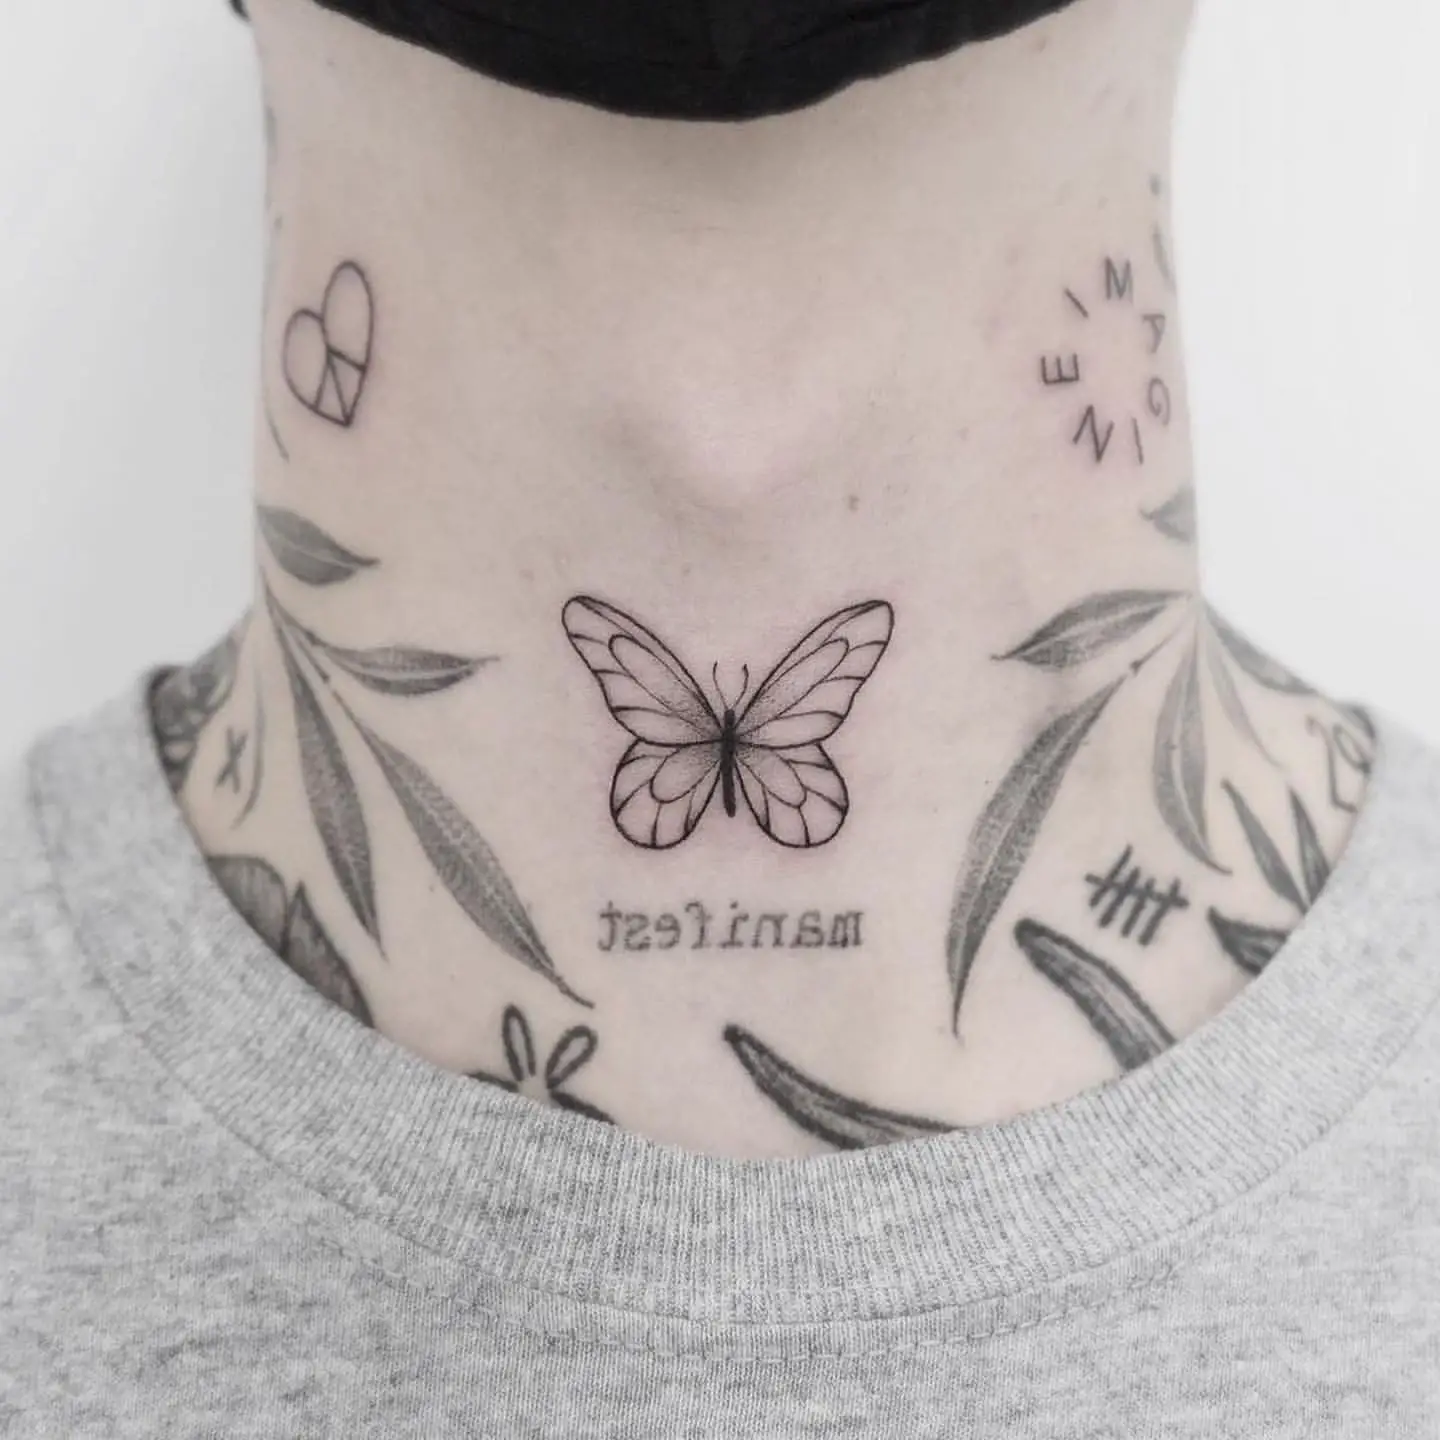 Linework Butterfly Tattoo on Man’s Neck